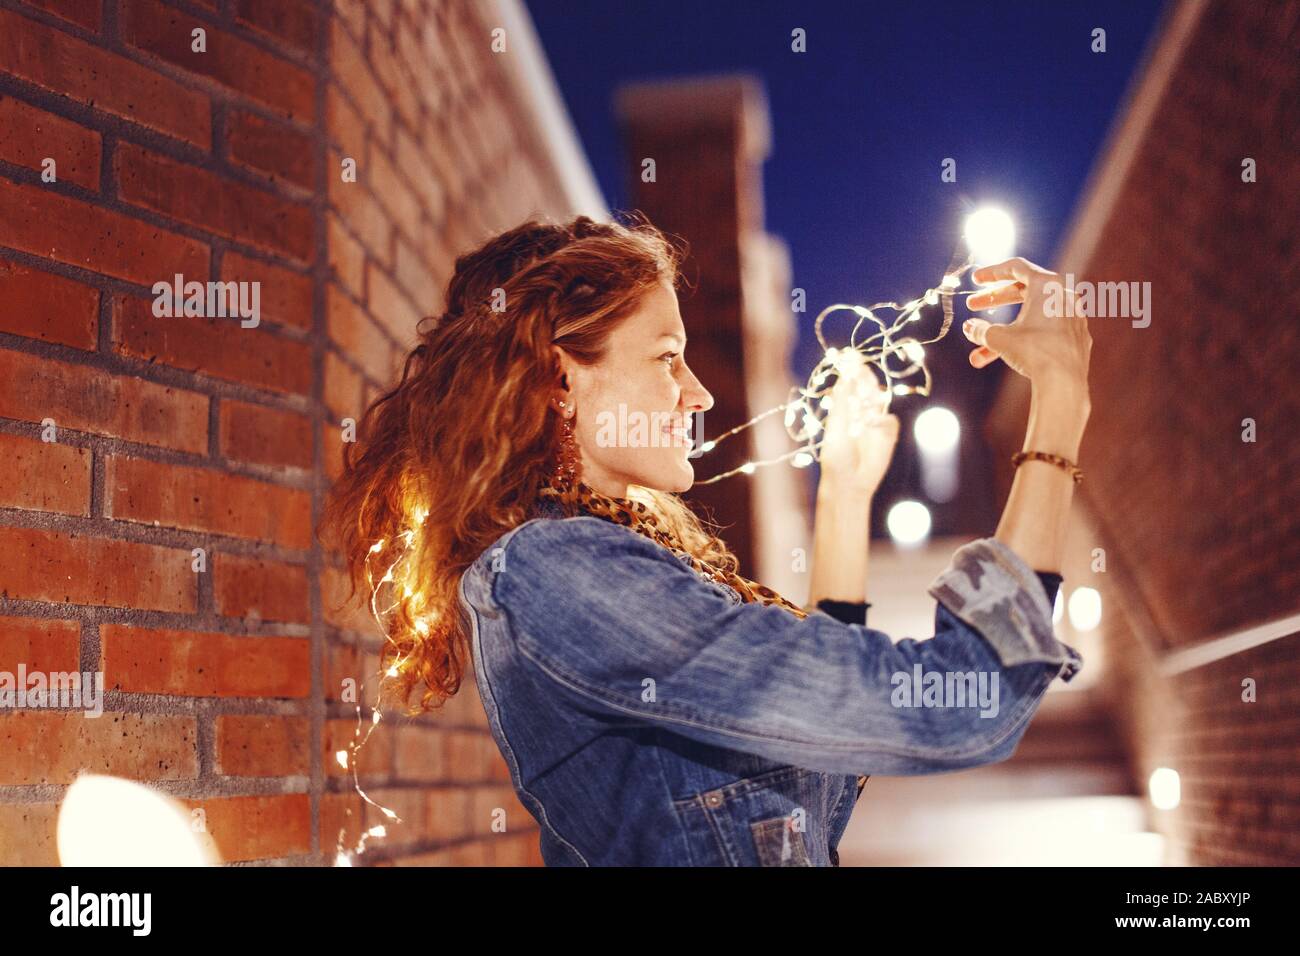 Young cheerful redhead Caucasian woman Playing with fairy lights outdoors Banque D'Images